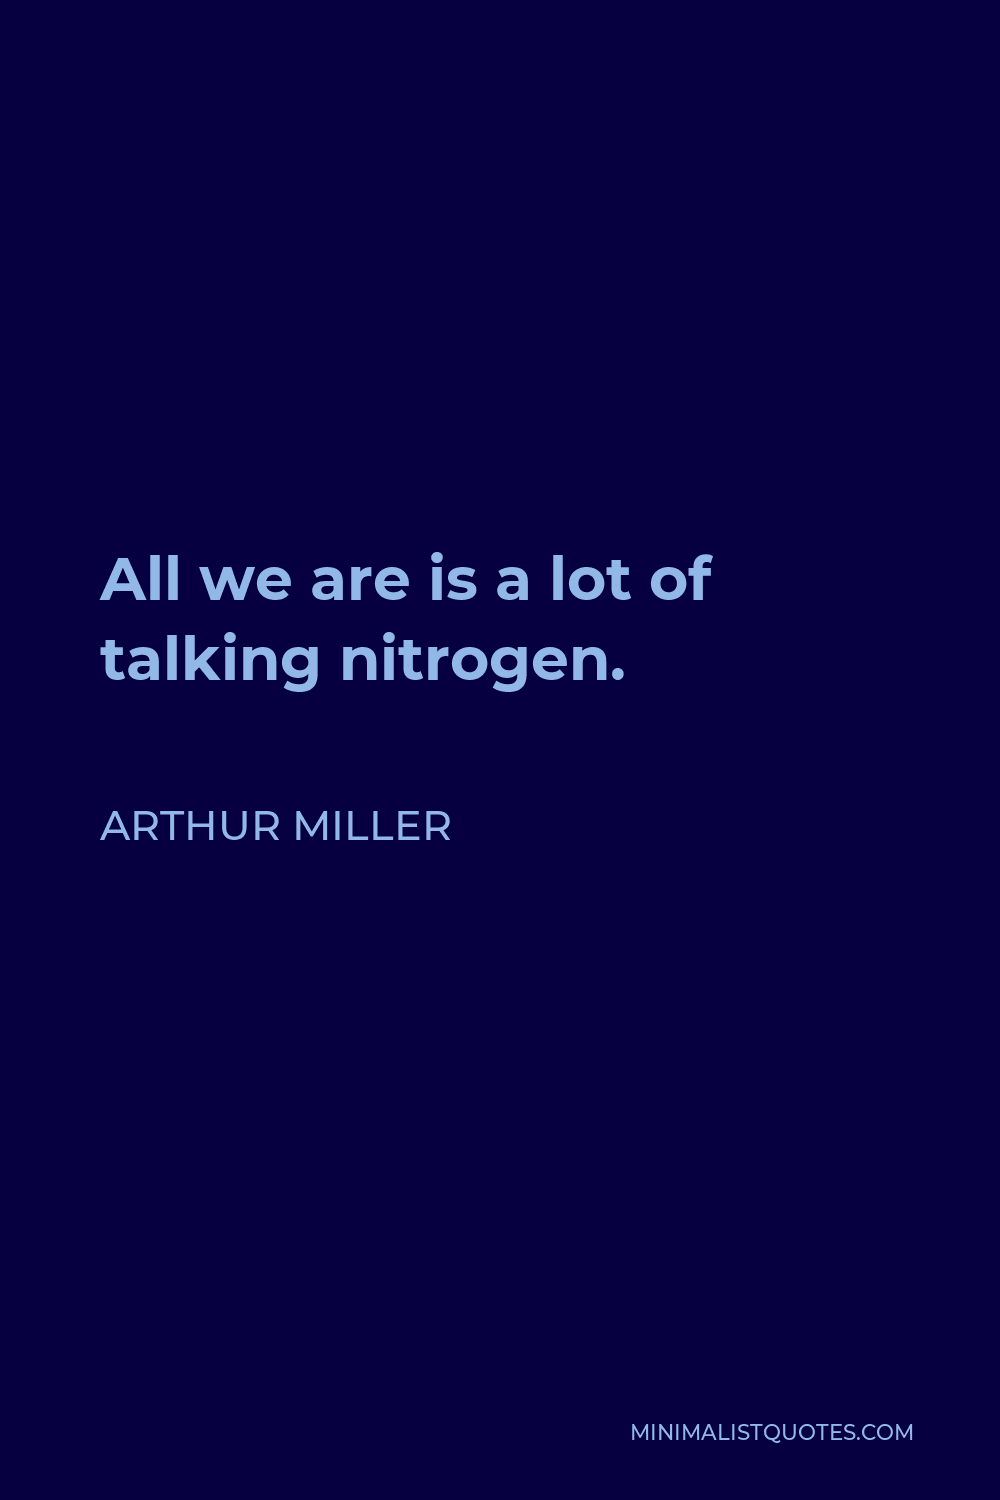 Arthur Miller Quote - All we are is a lot of talking nitrogen.